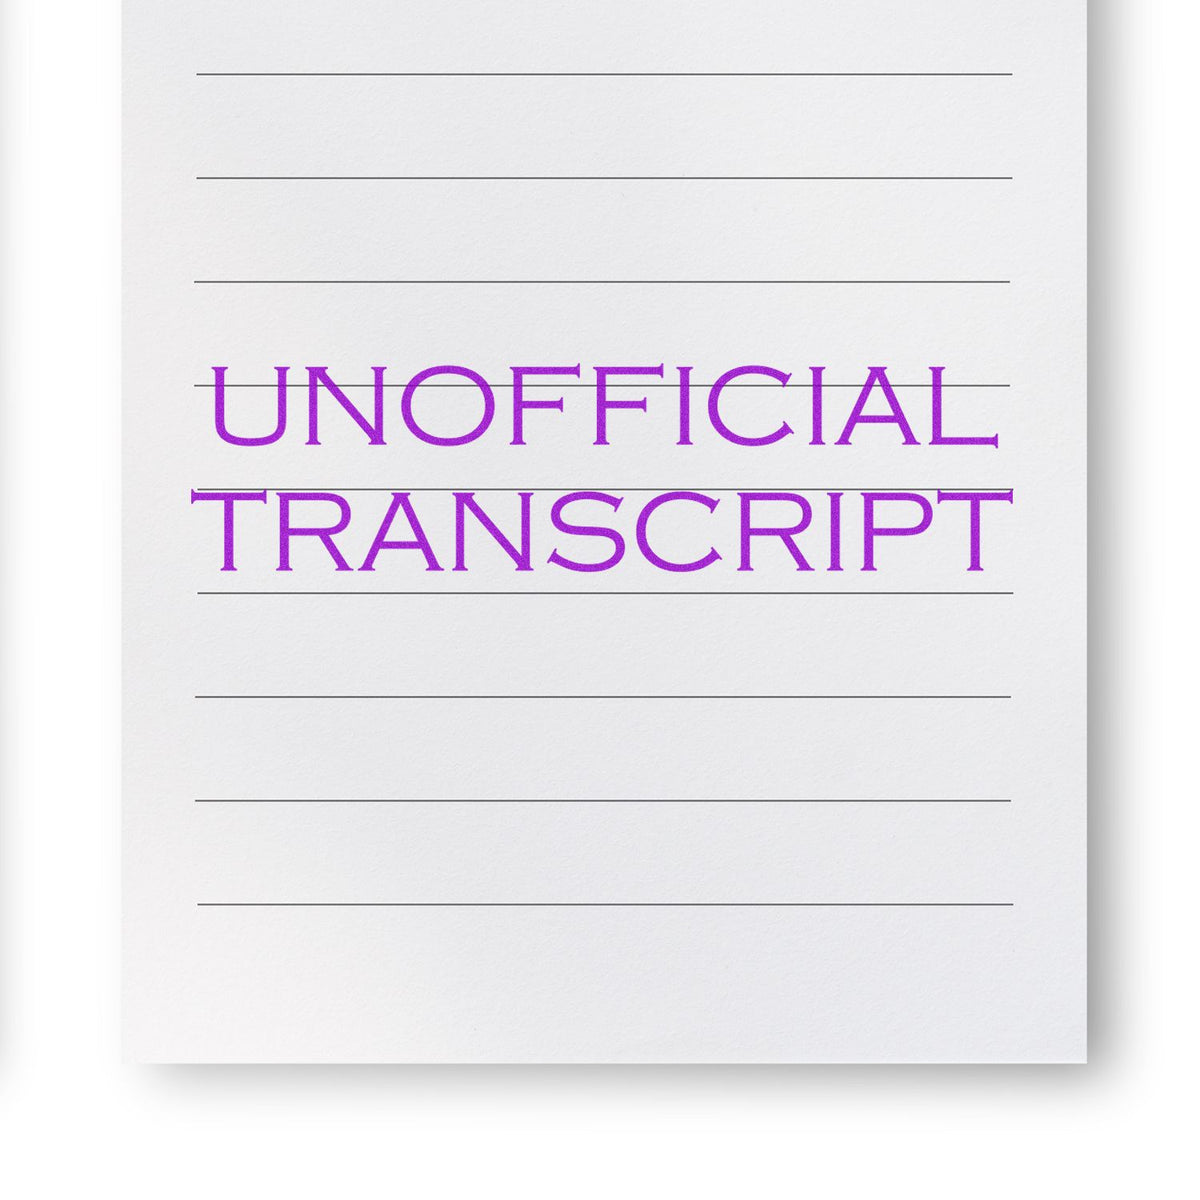 Large Unofficial Transcript Rubber Stamp In Use